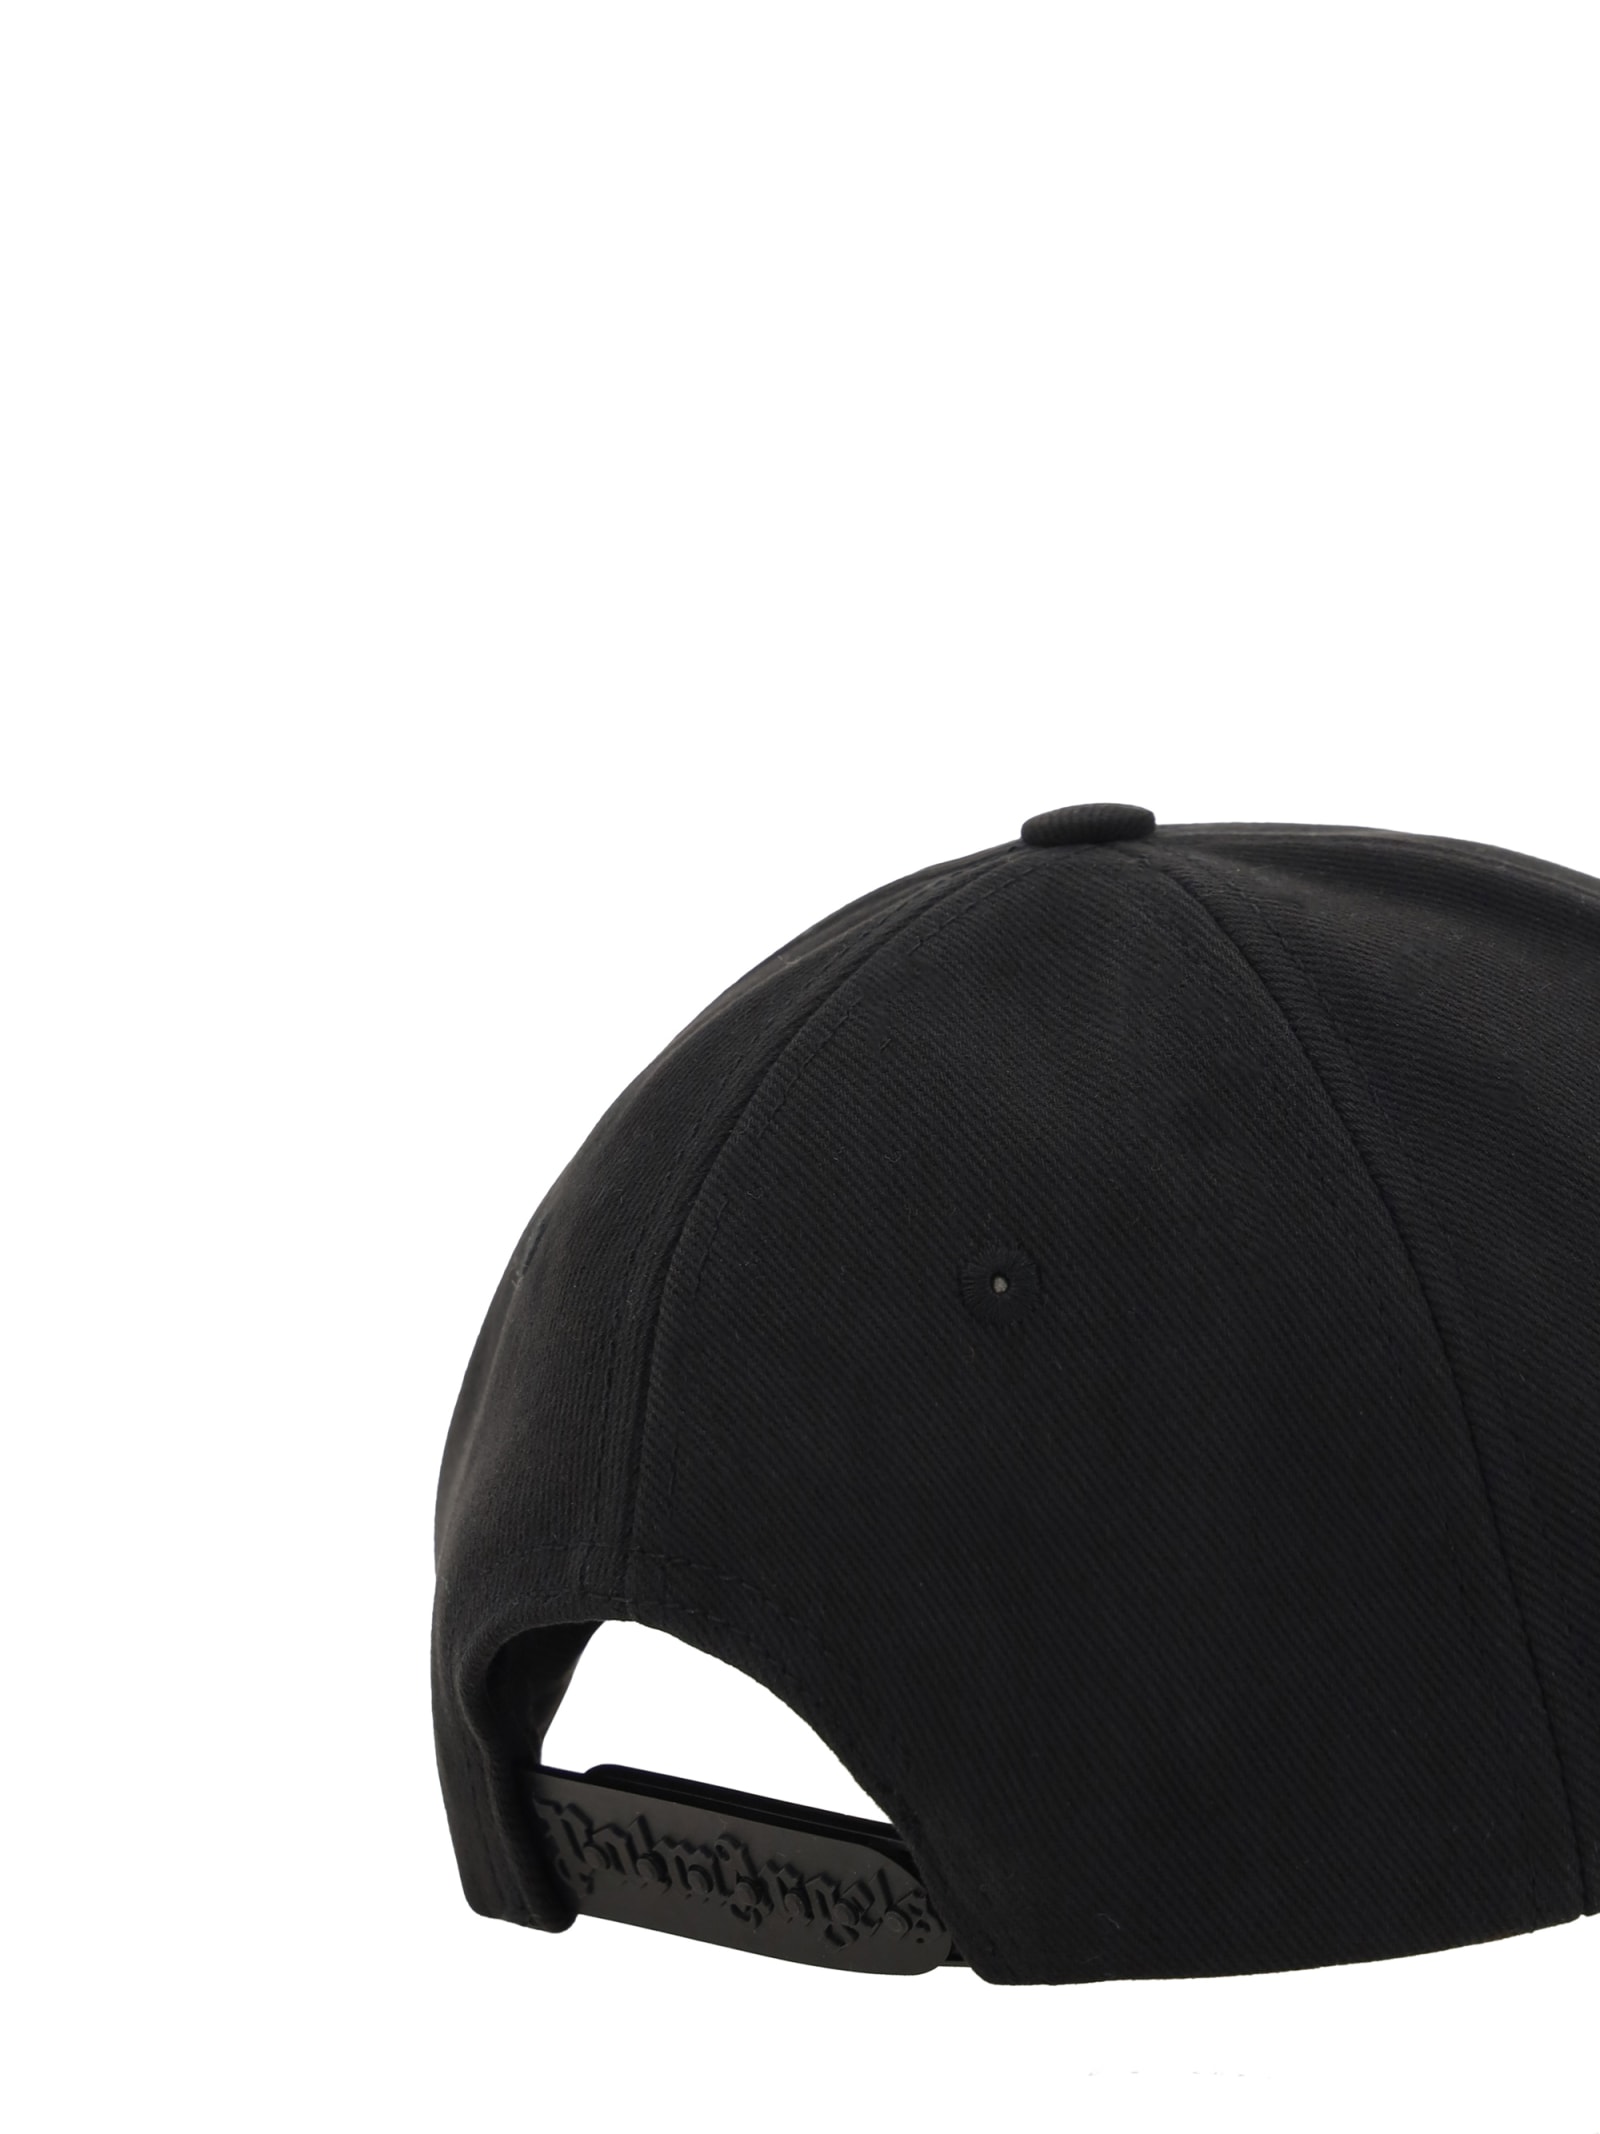 Palm Angels Baseball Hat With Palm Print in Black for Men